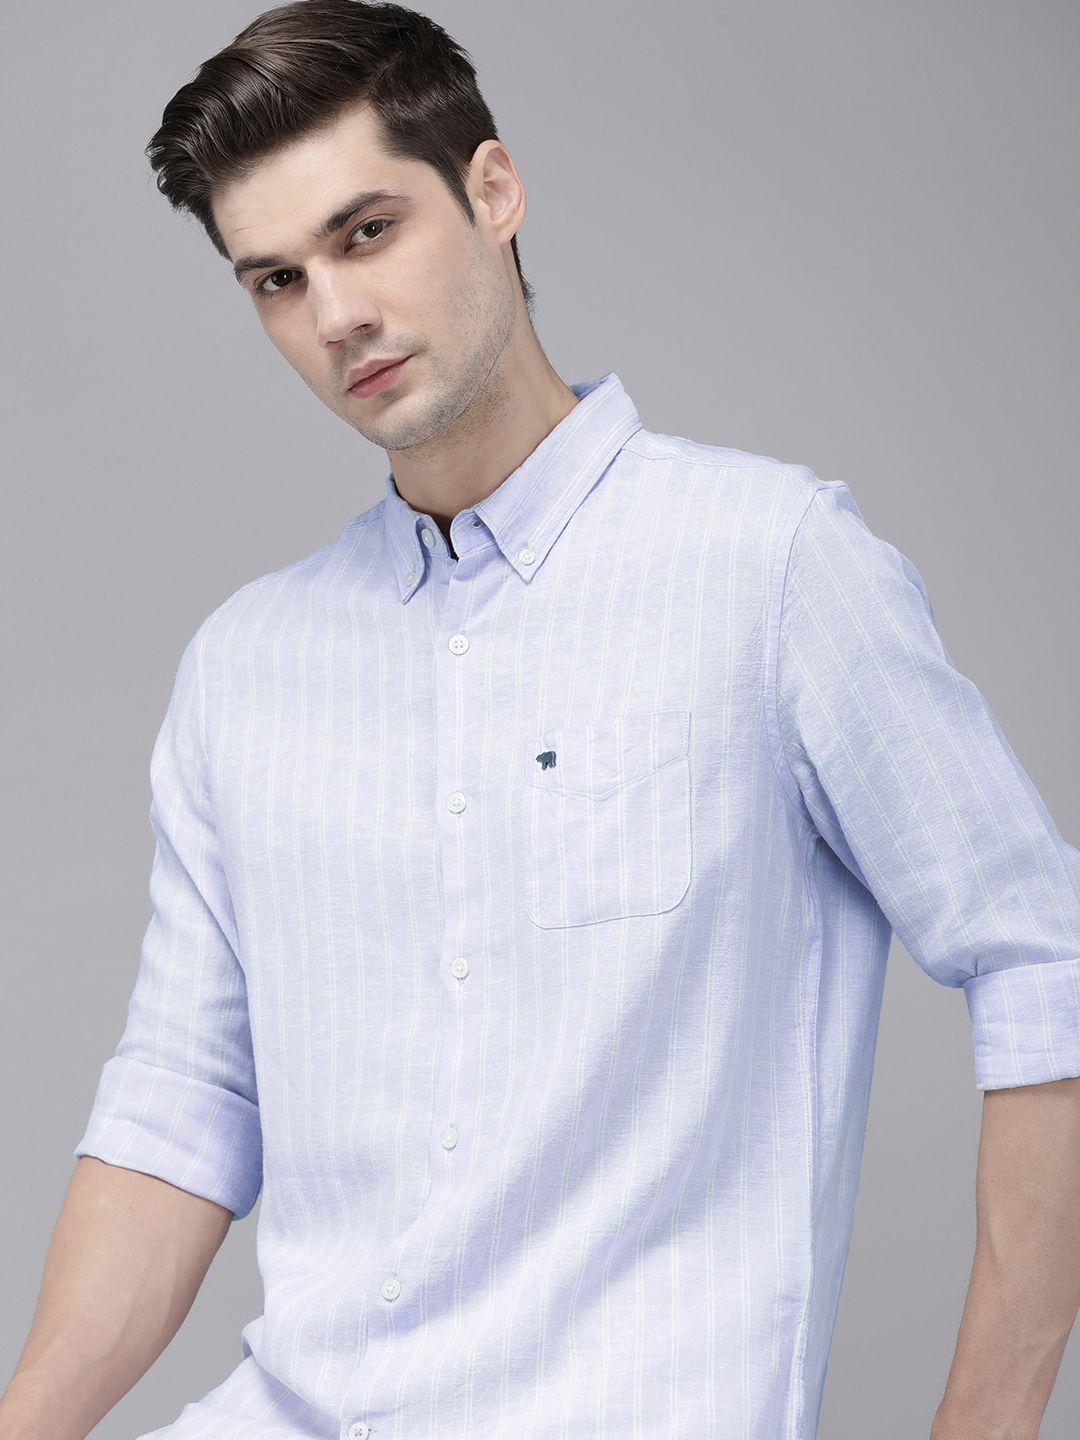 the-bear-house-men-slim-fit-opaque-striped-casual-shirt